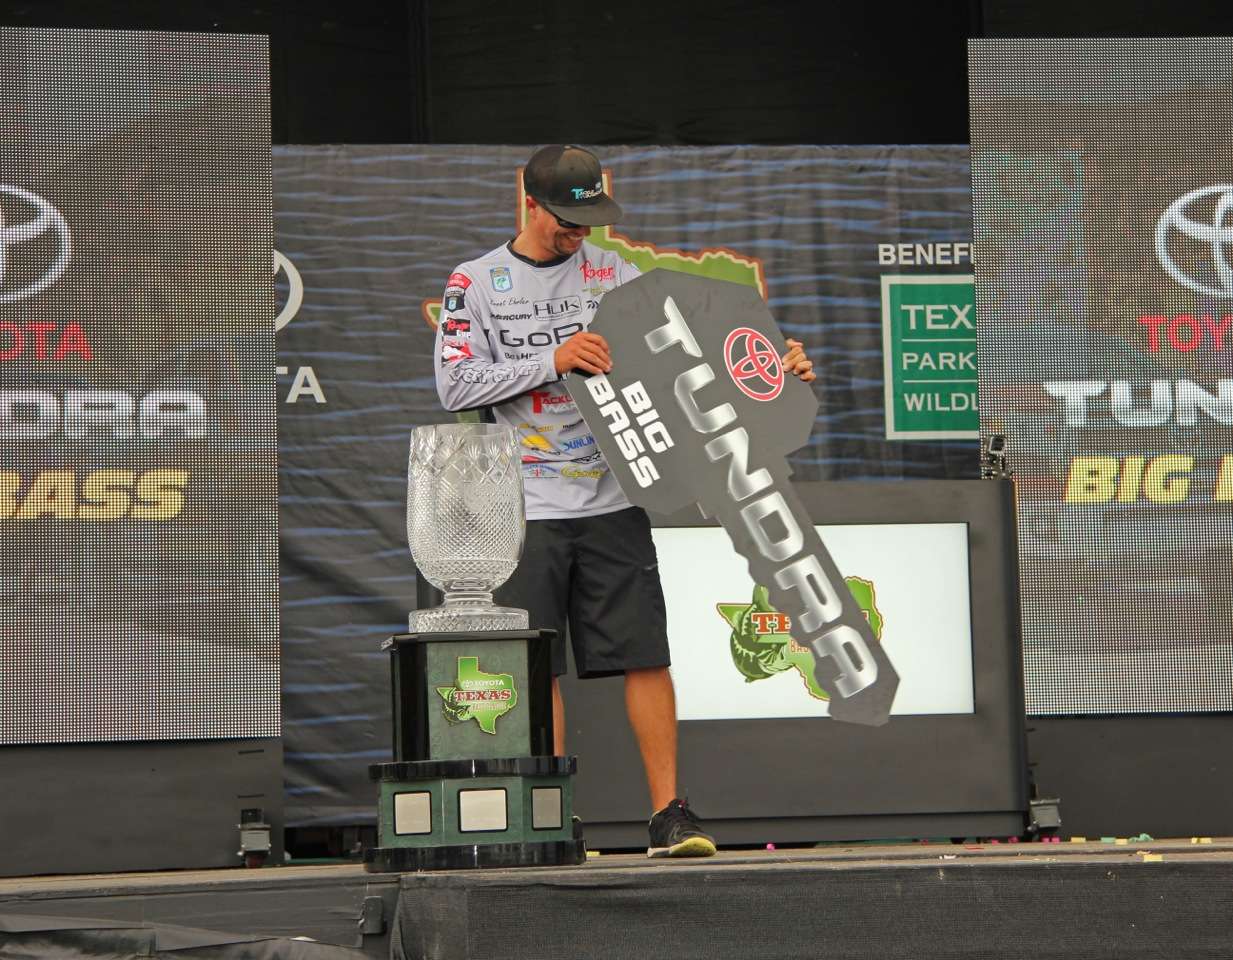 Not only did the big 10-pounder win him the tournament â but also the key to a brand new Tundra for catching the biggest bass of the tournament.